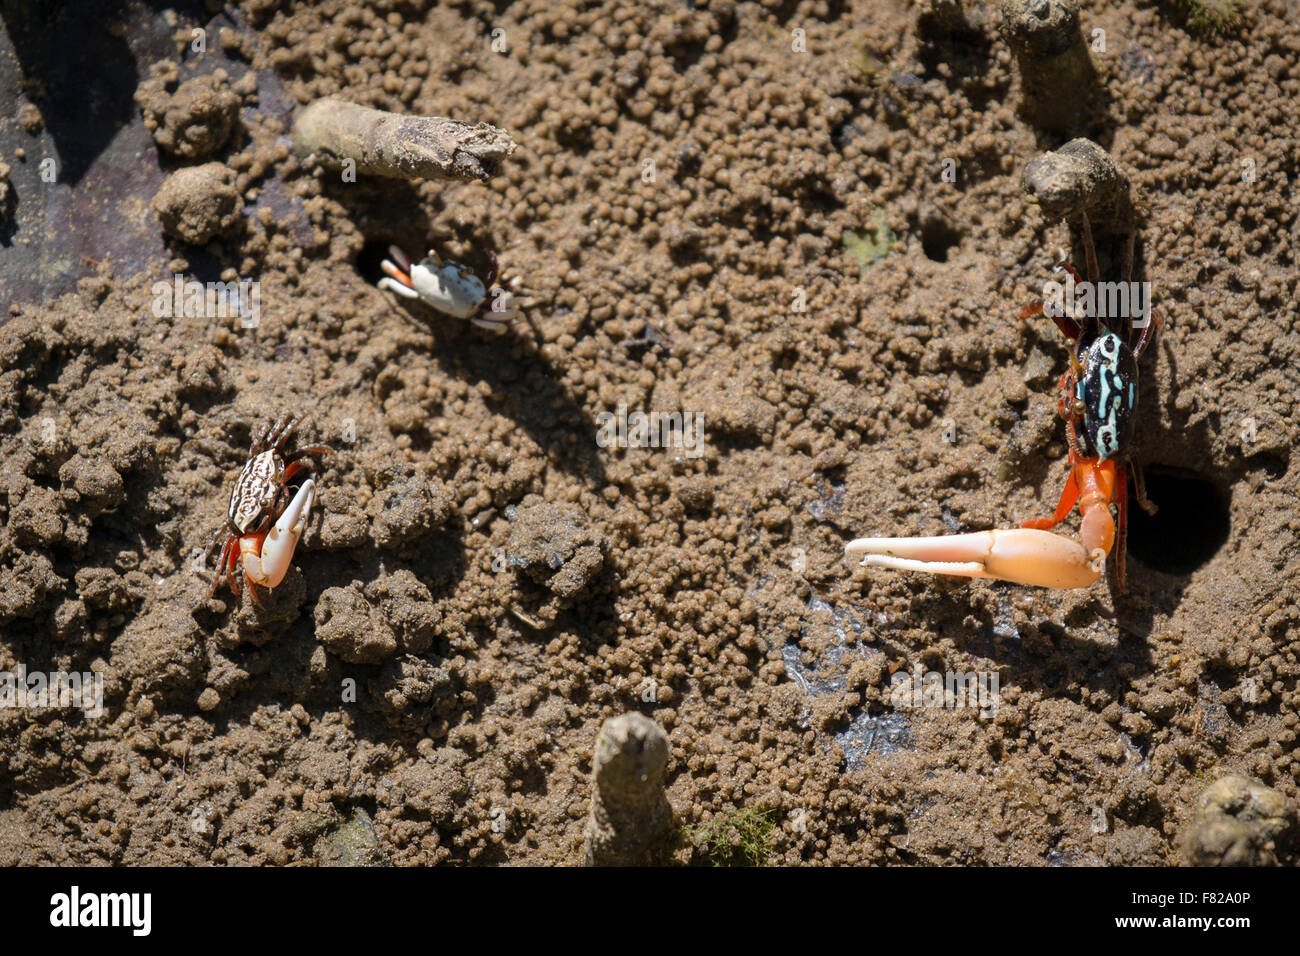 Unequal rivals, ring-legged fiddler crabs (Uca annulipes) display Stock Photo